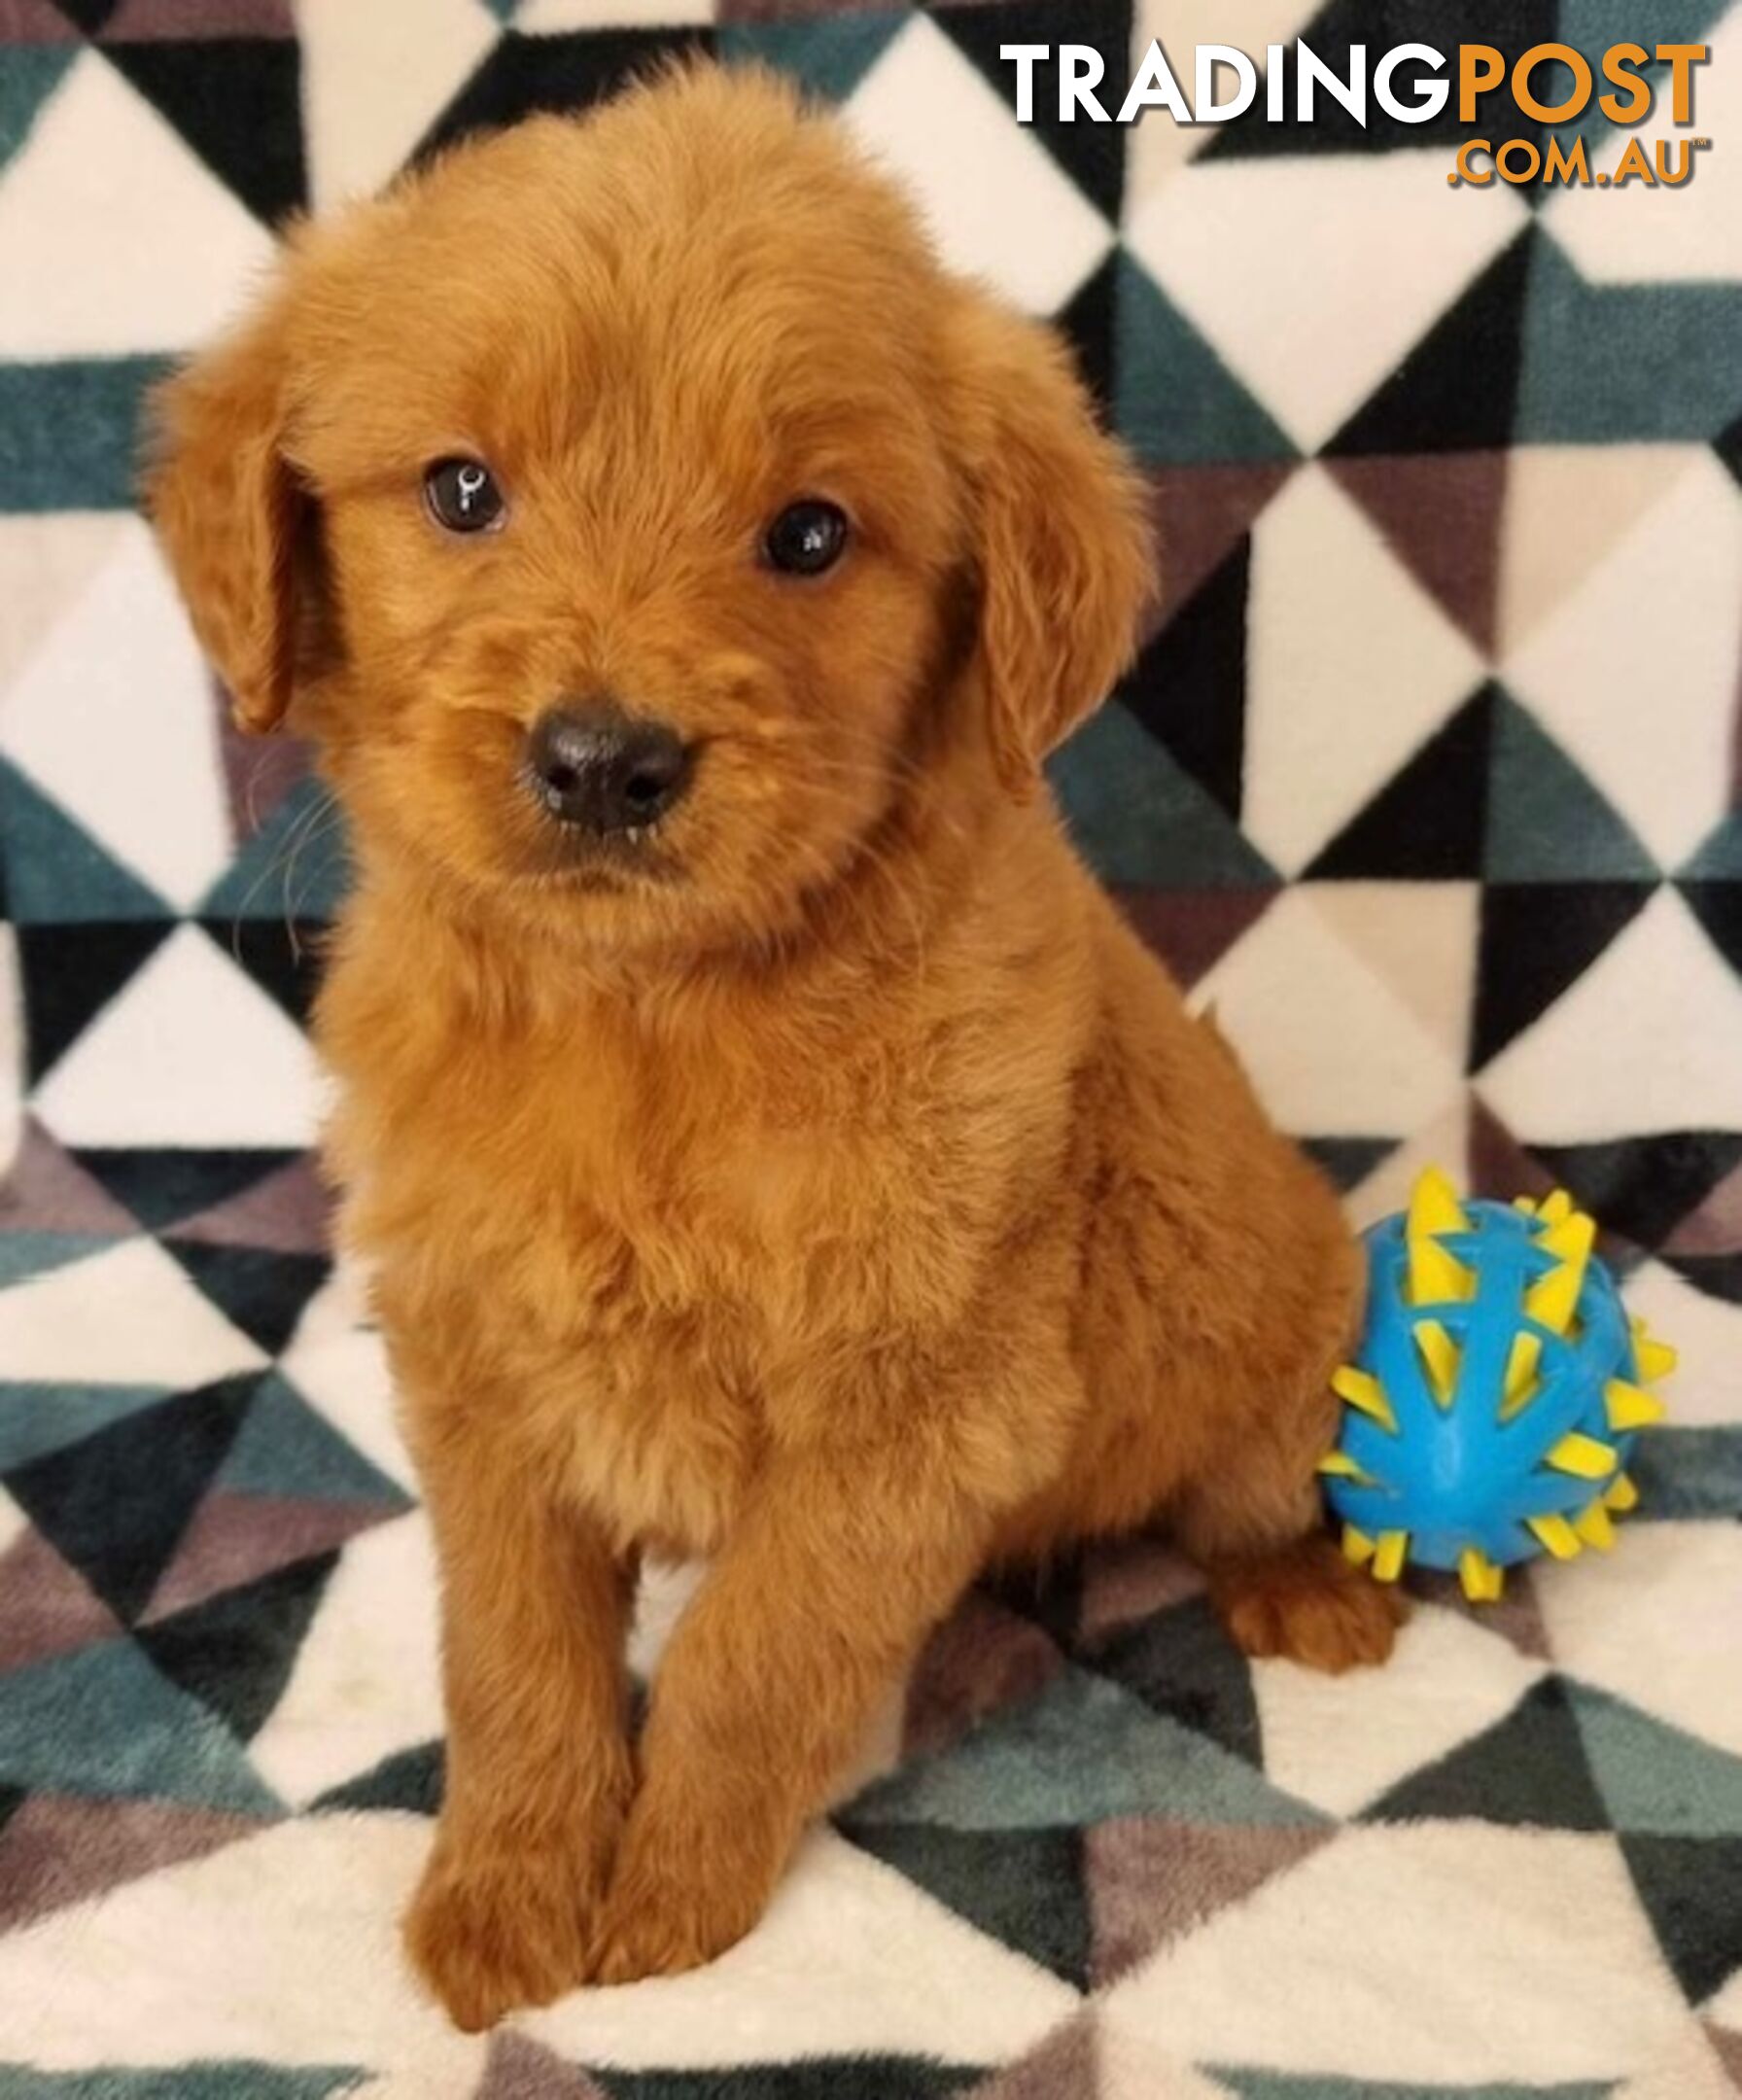 Standard Groodle Puppies (Golden Retriever x Poodle Puppies)